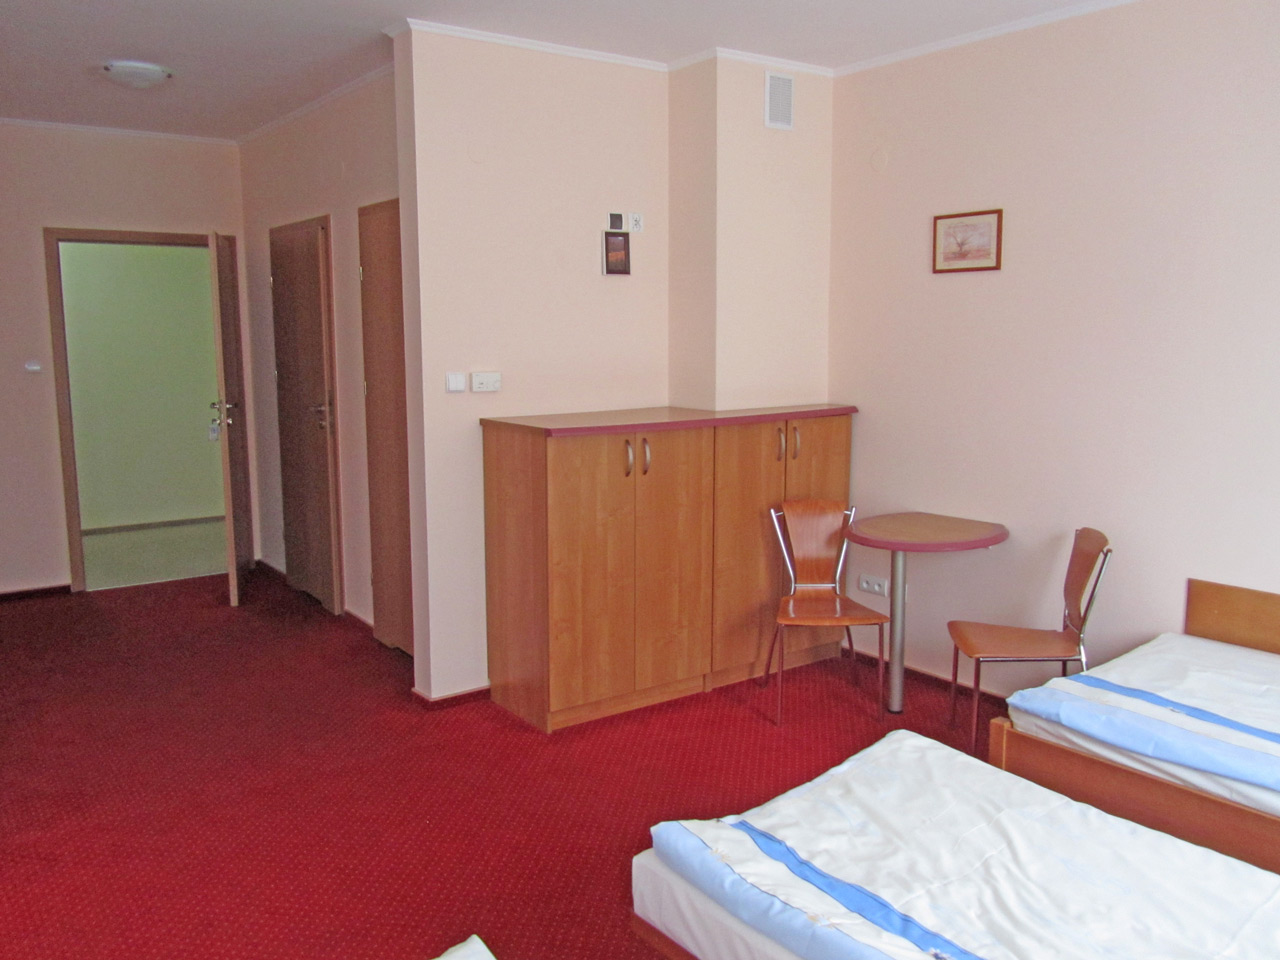 ROOMS Krosno accommodation in the city center, rest in Poland 06